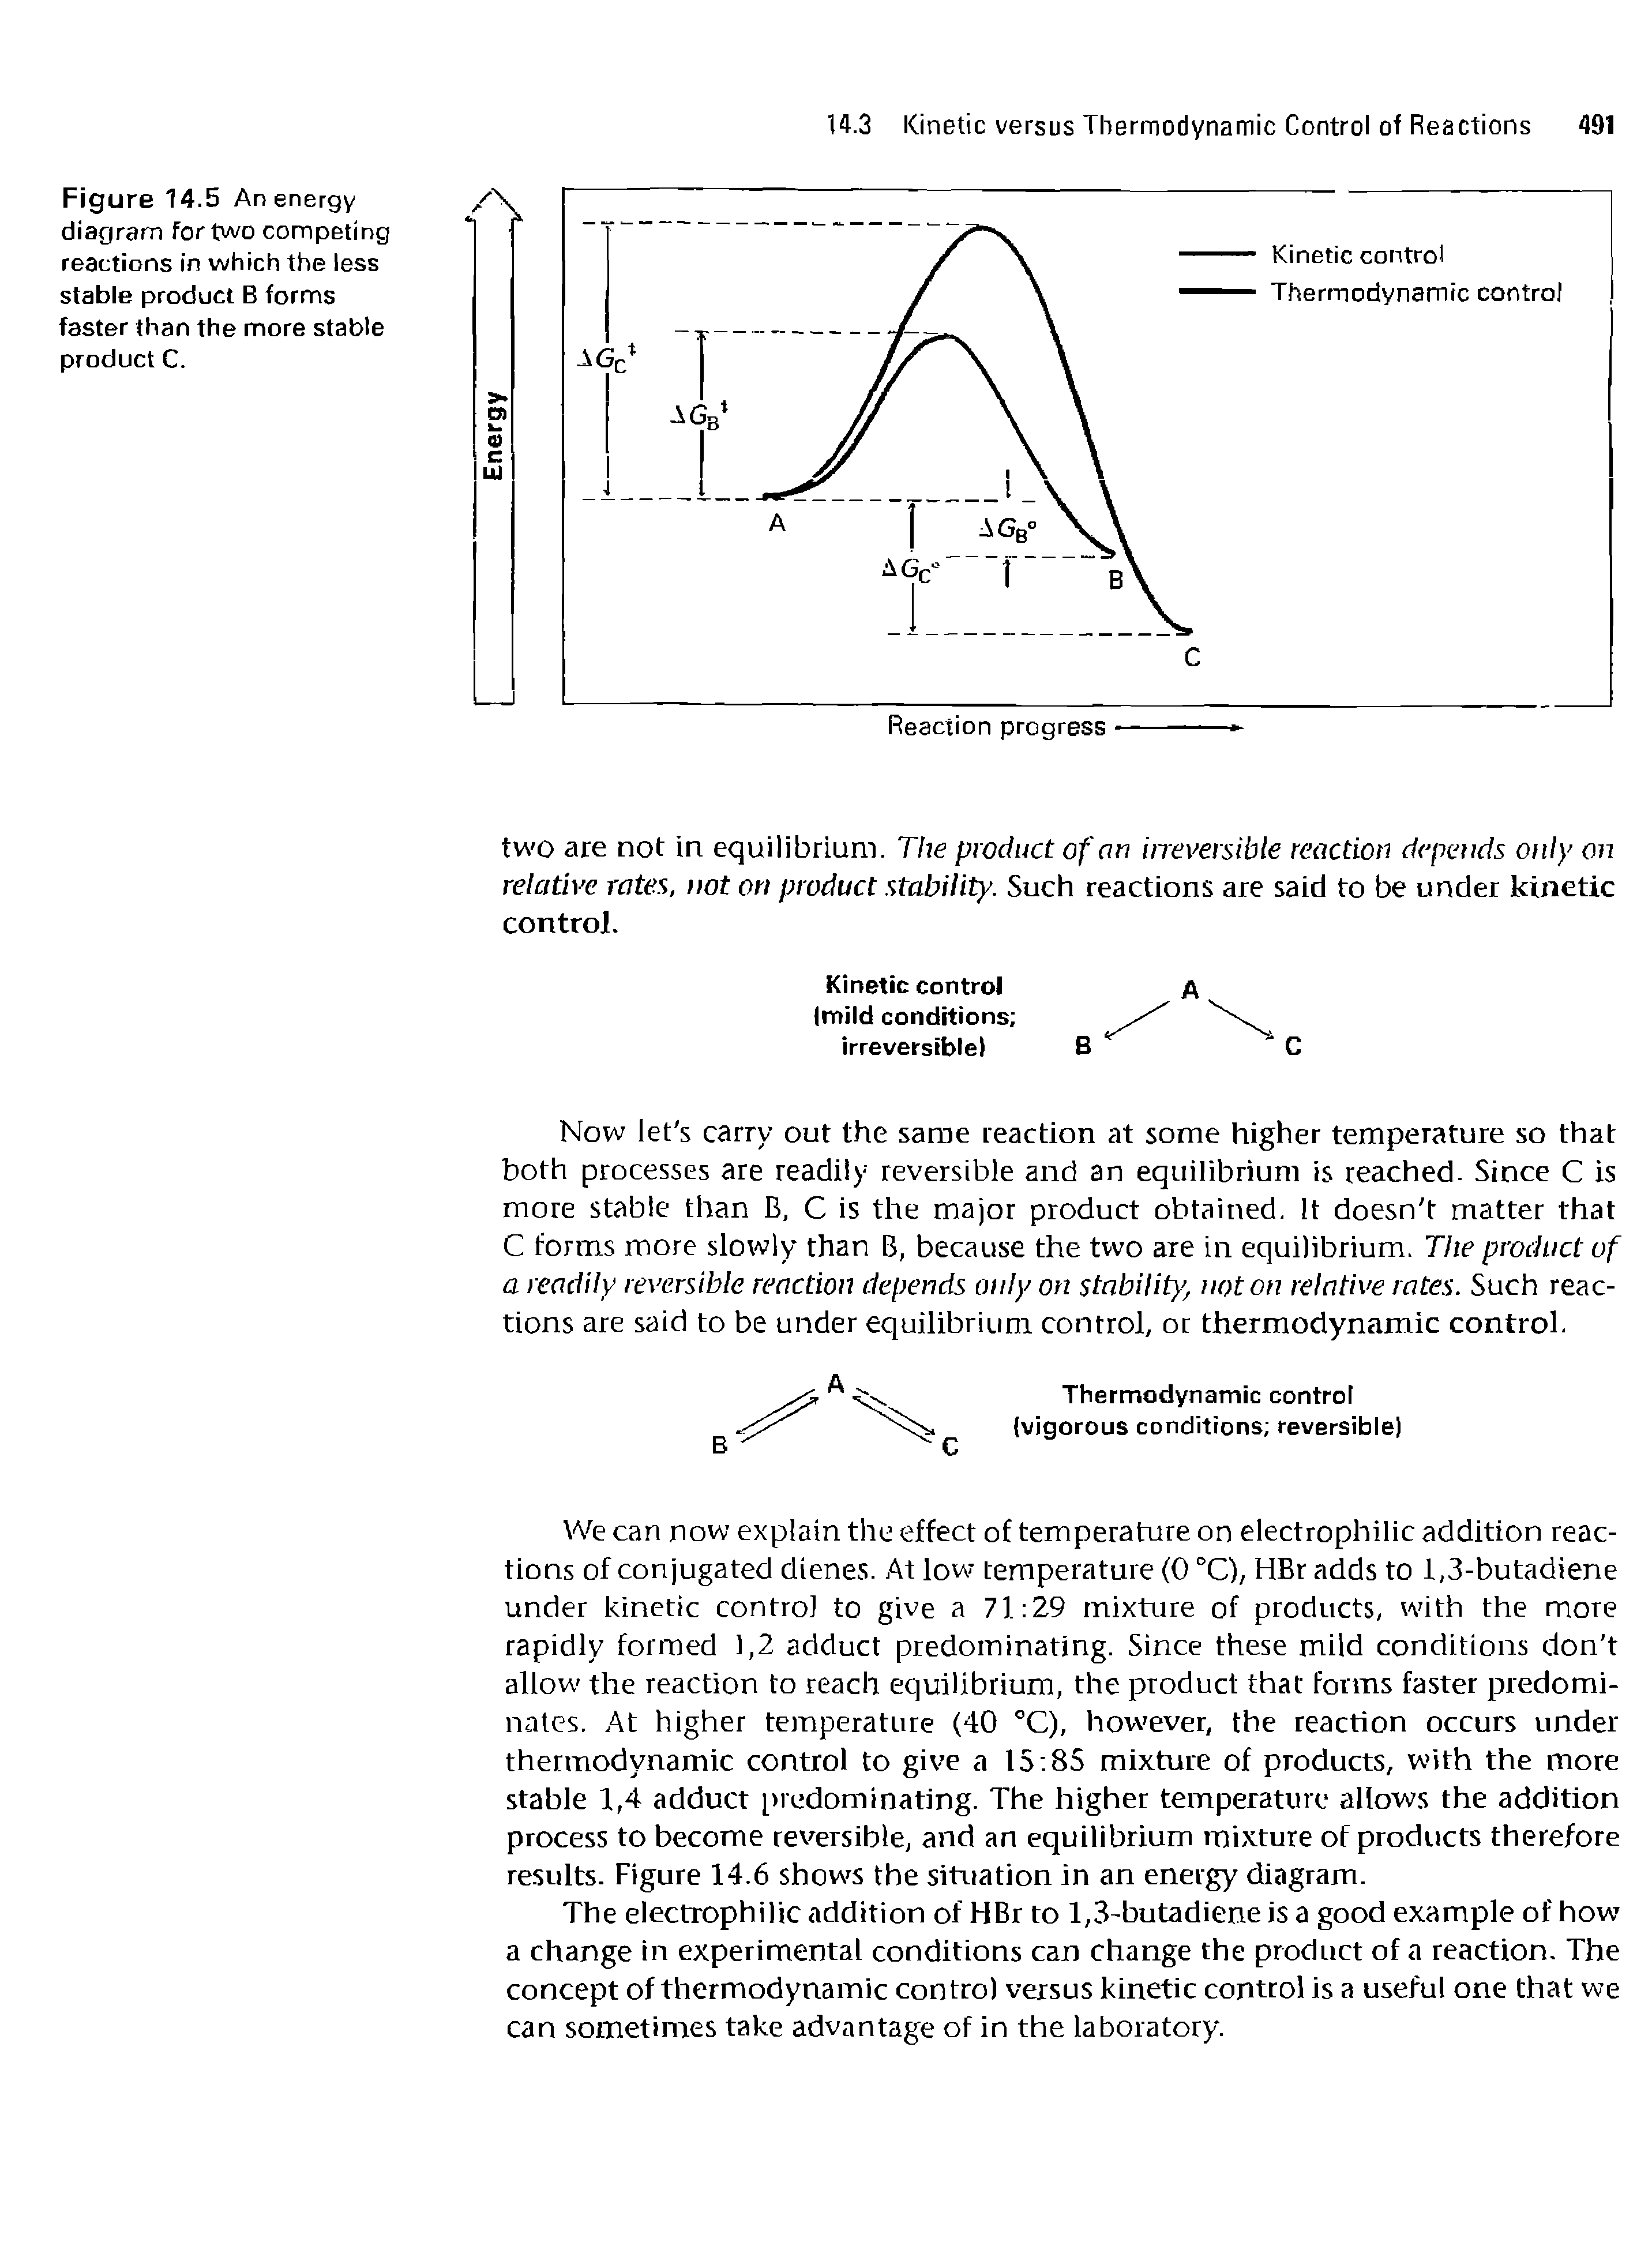 Figure 14.5 An energy diagram for two competing reactions in which the less stable product B forms faster than the more stable product C.